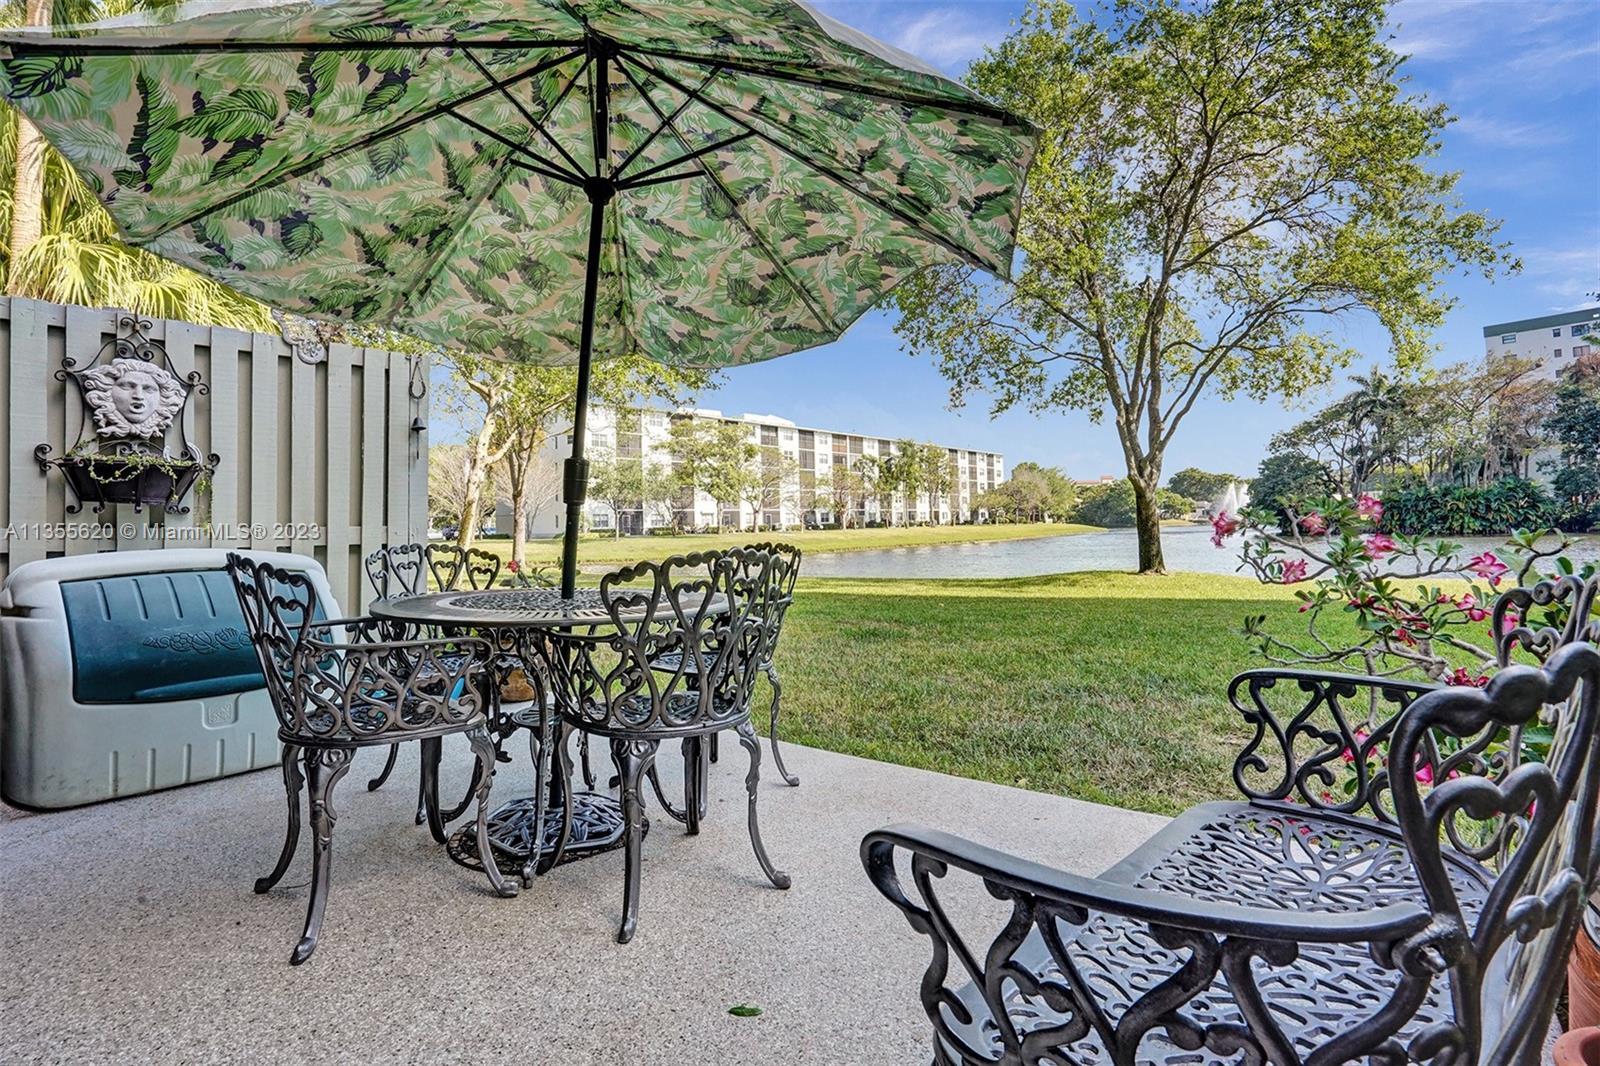 THE MOST BEAUTIFUL UNIT OF CYPRESS BEND is now FOR SALE! DIRECTLY ON THE 1ST FLOOR, this CORNER UNIT